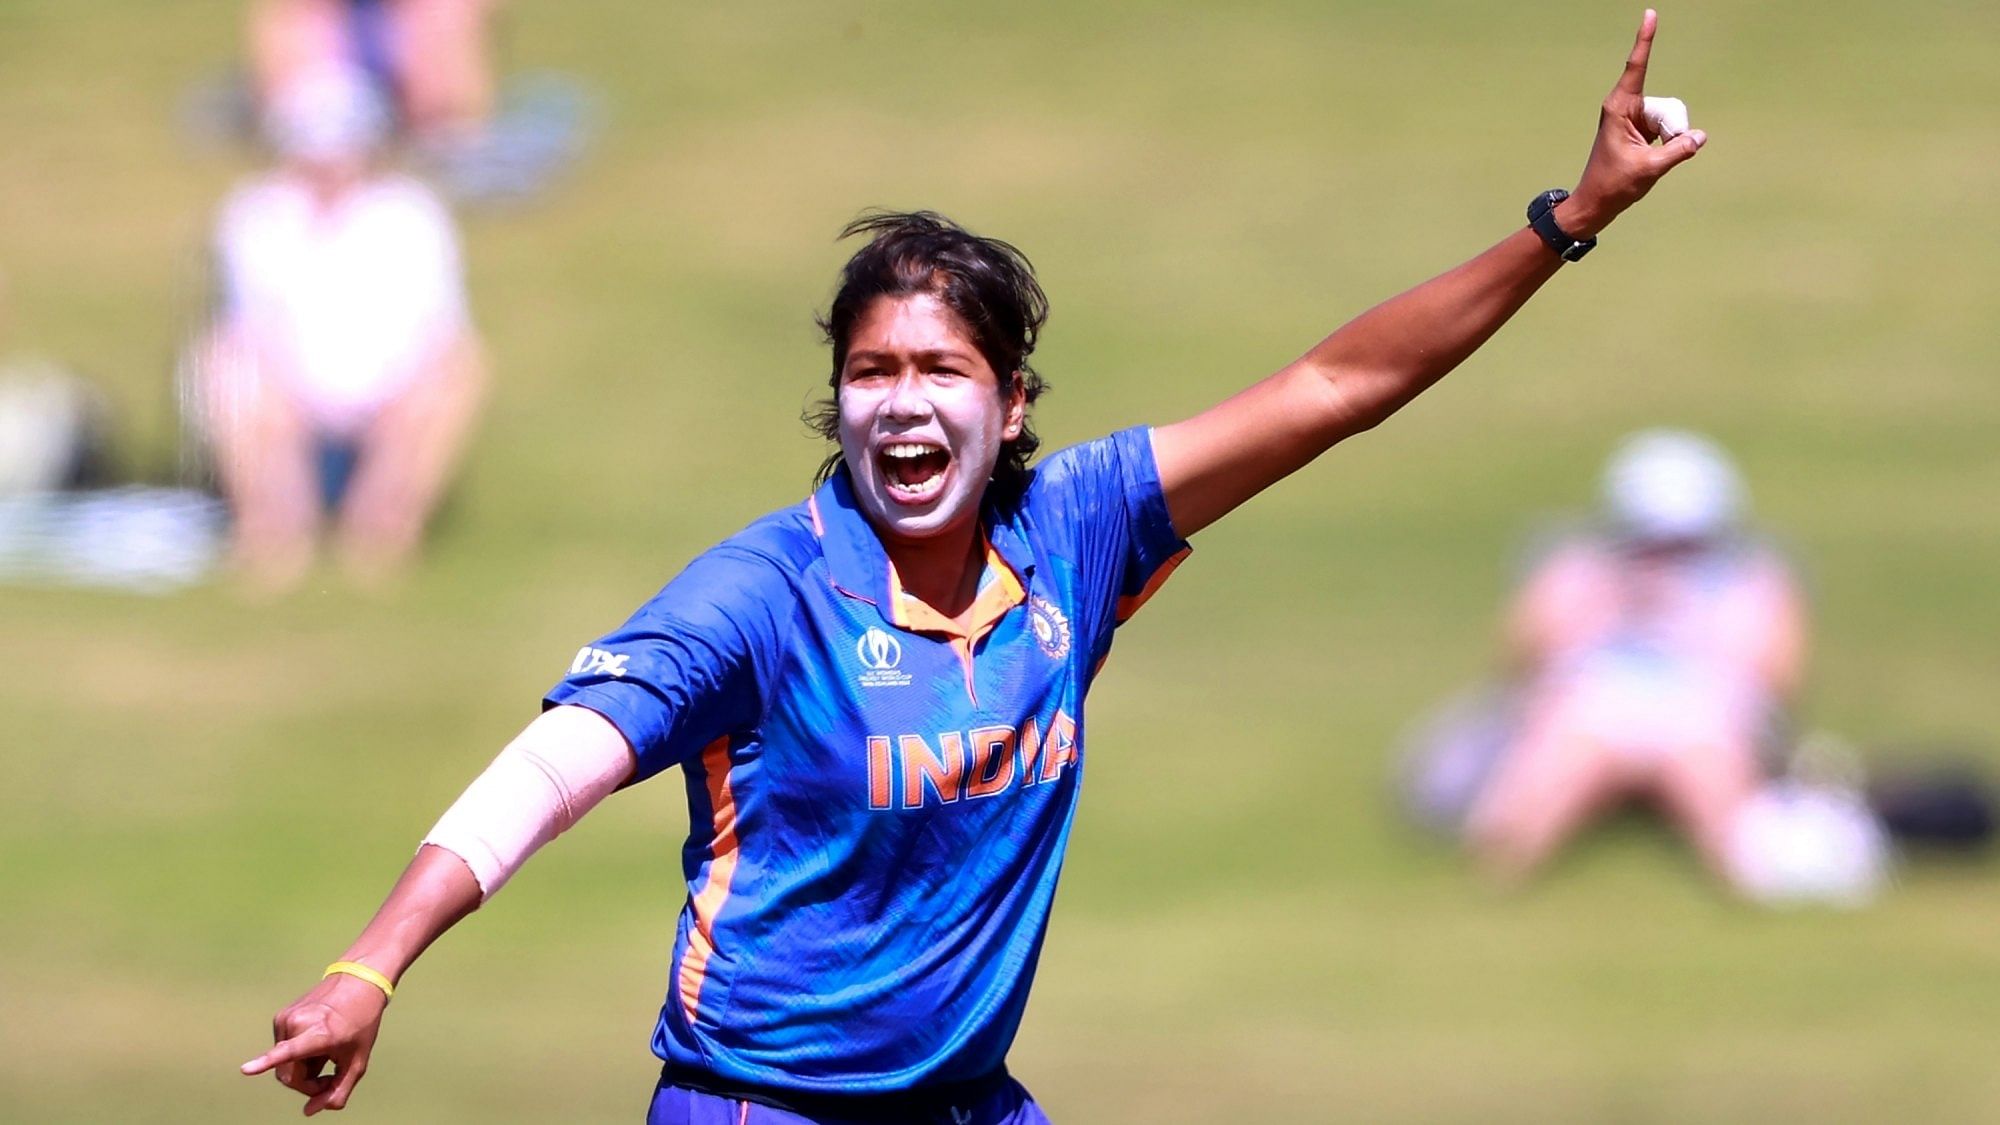 Jhulan grabbed her 40th scalp in World Cups and also became the leading wicket-taker in history of the tournament. Credit: IANS Photo